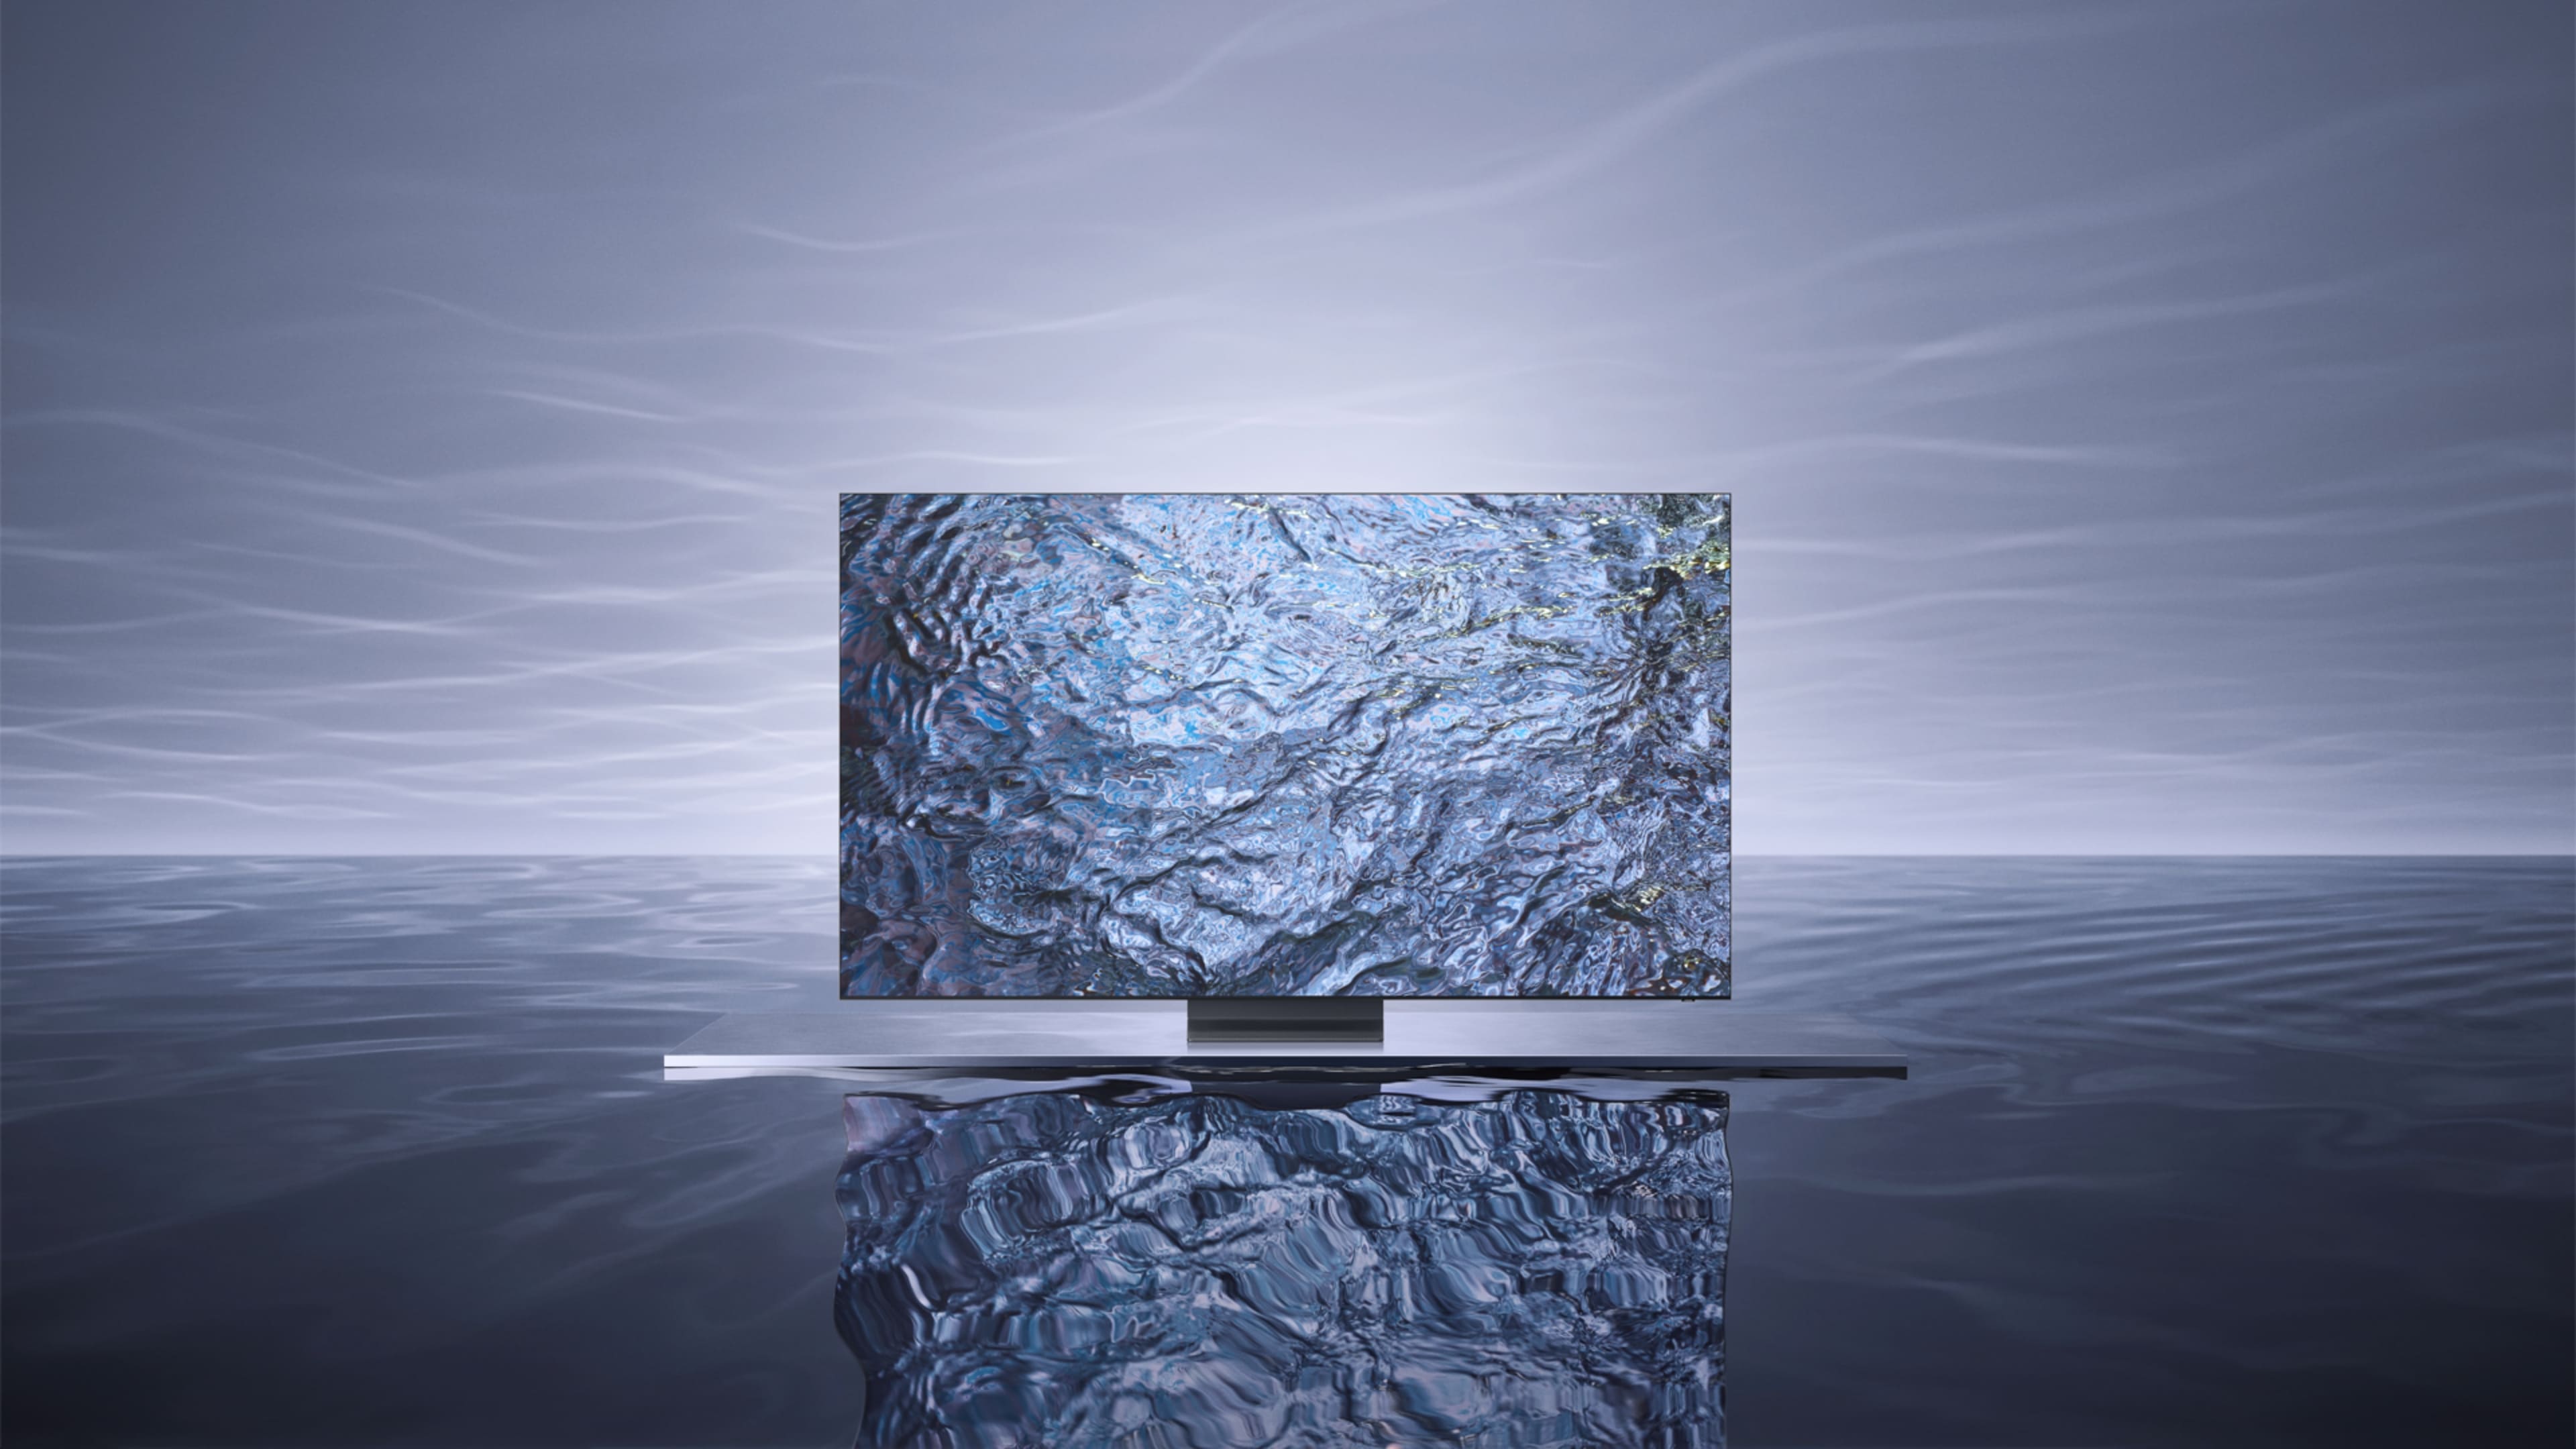 This is a key visual image for the Samsung TV on-screen identity story content.